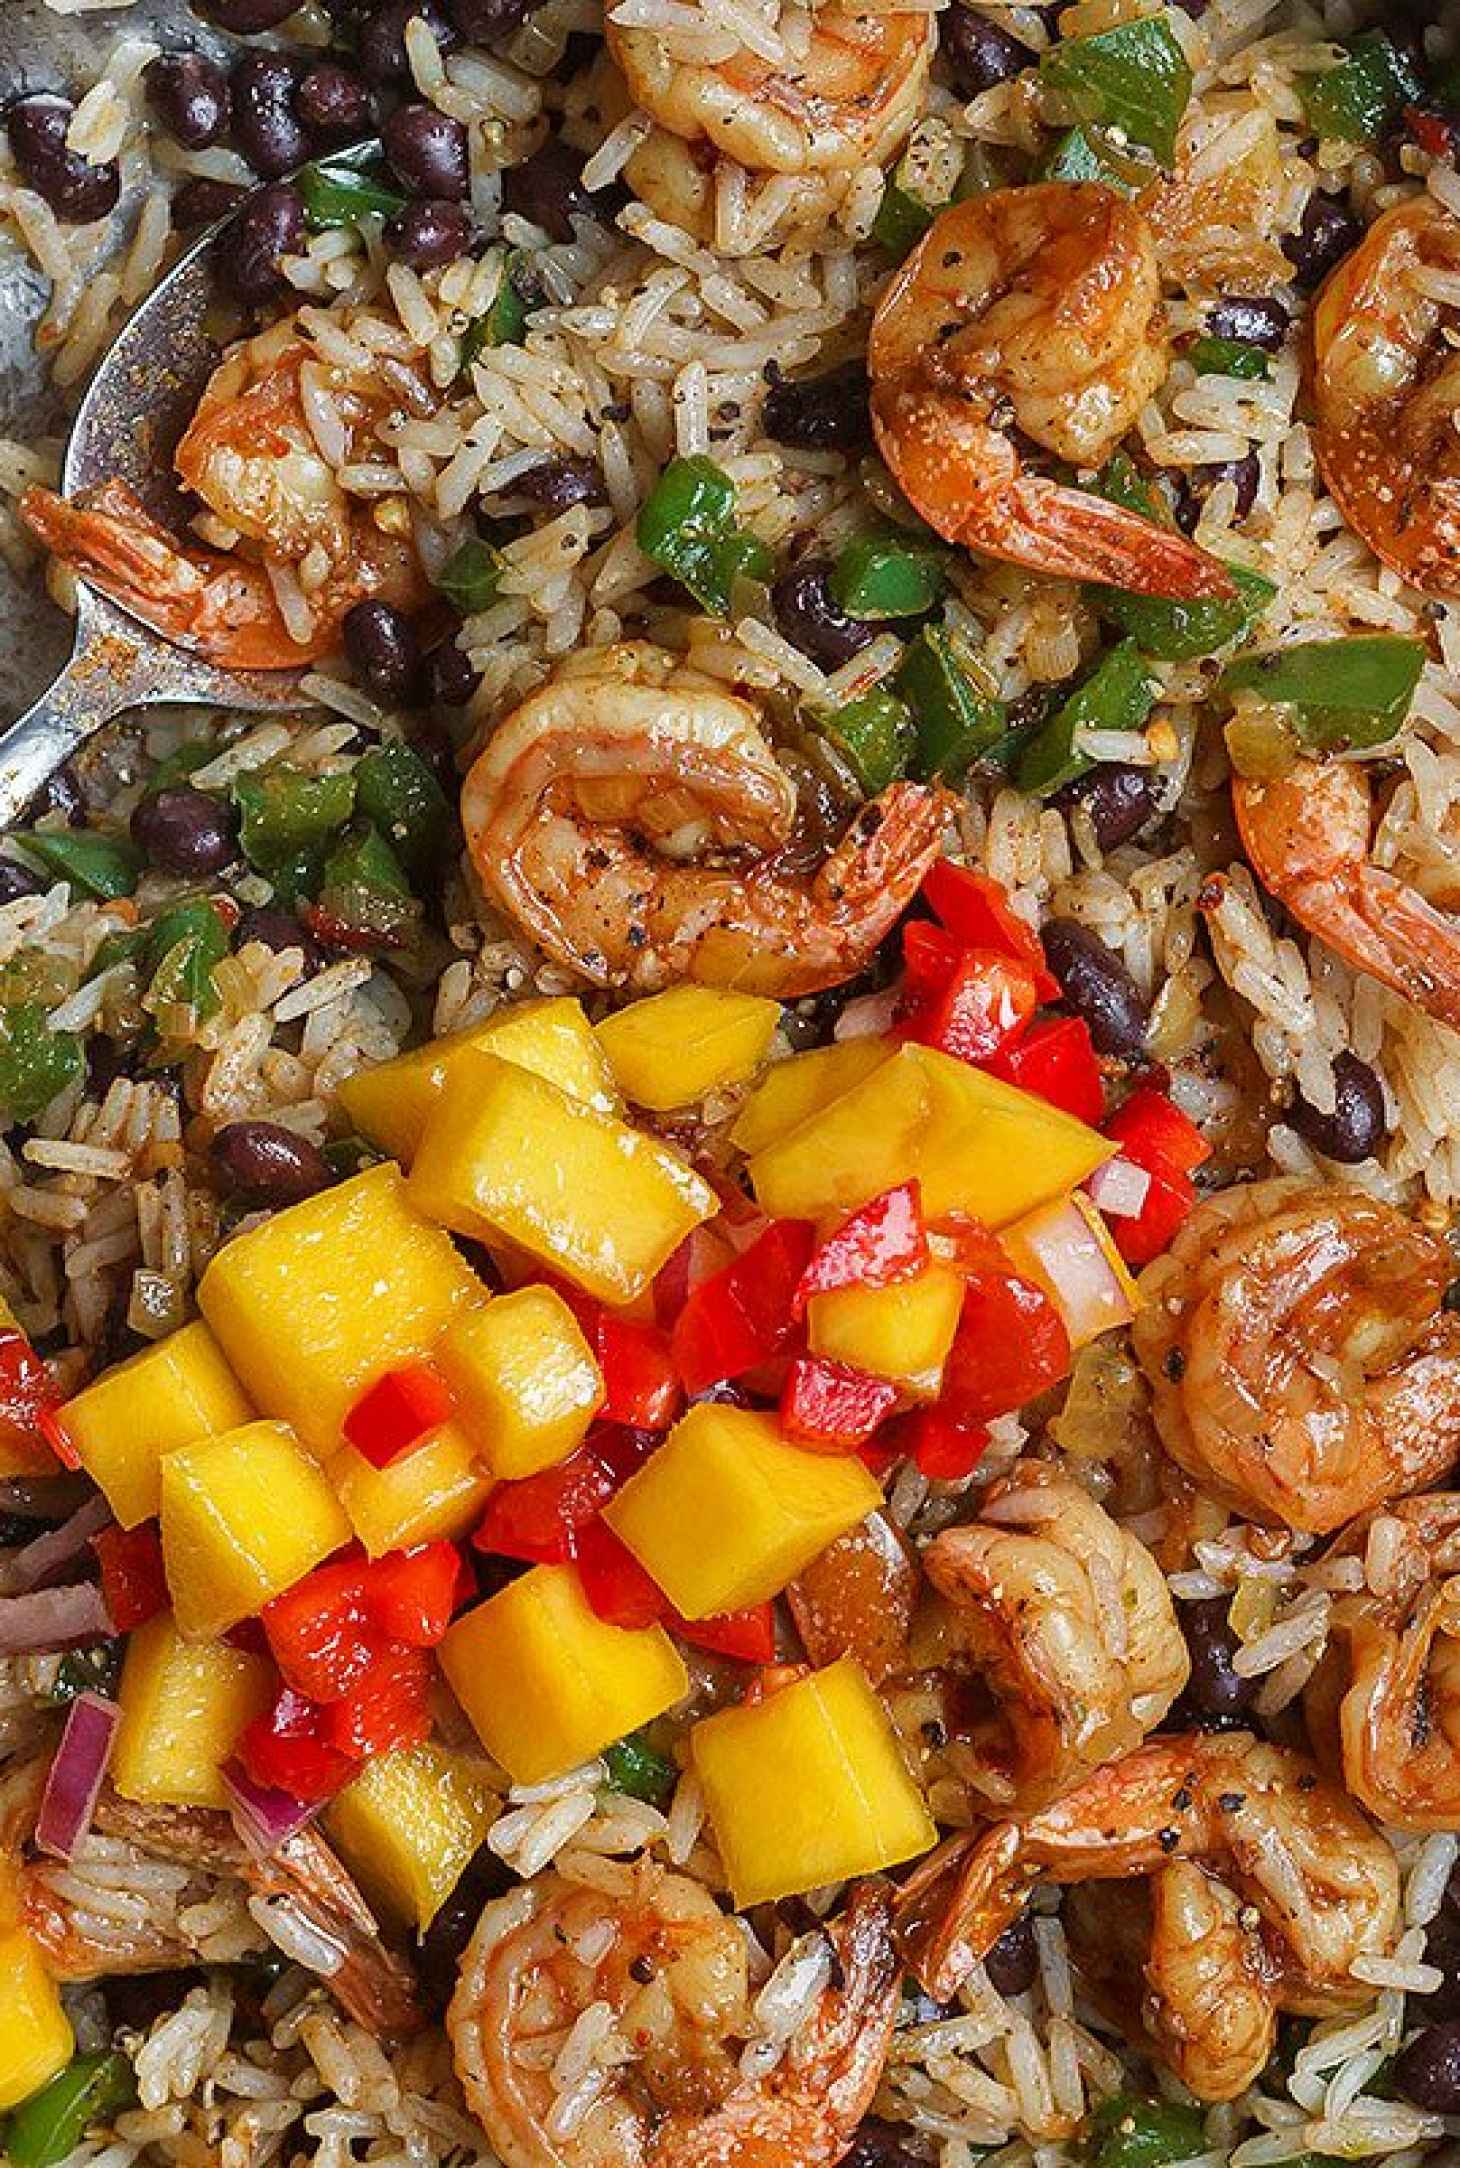 Spicy Shrimp Jerk with Rice and Black Beans - #recipe by #eatwell101 - https://www.eatwell101.com/jerk-shrimp-black-bean-rice